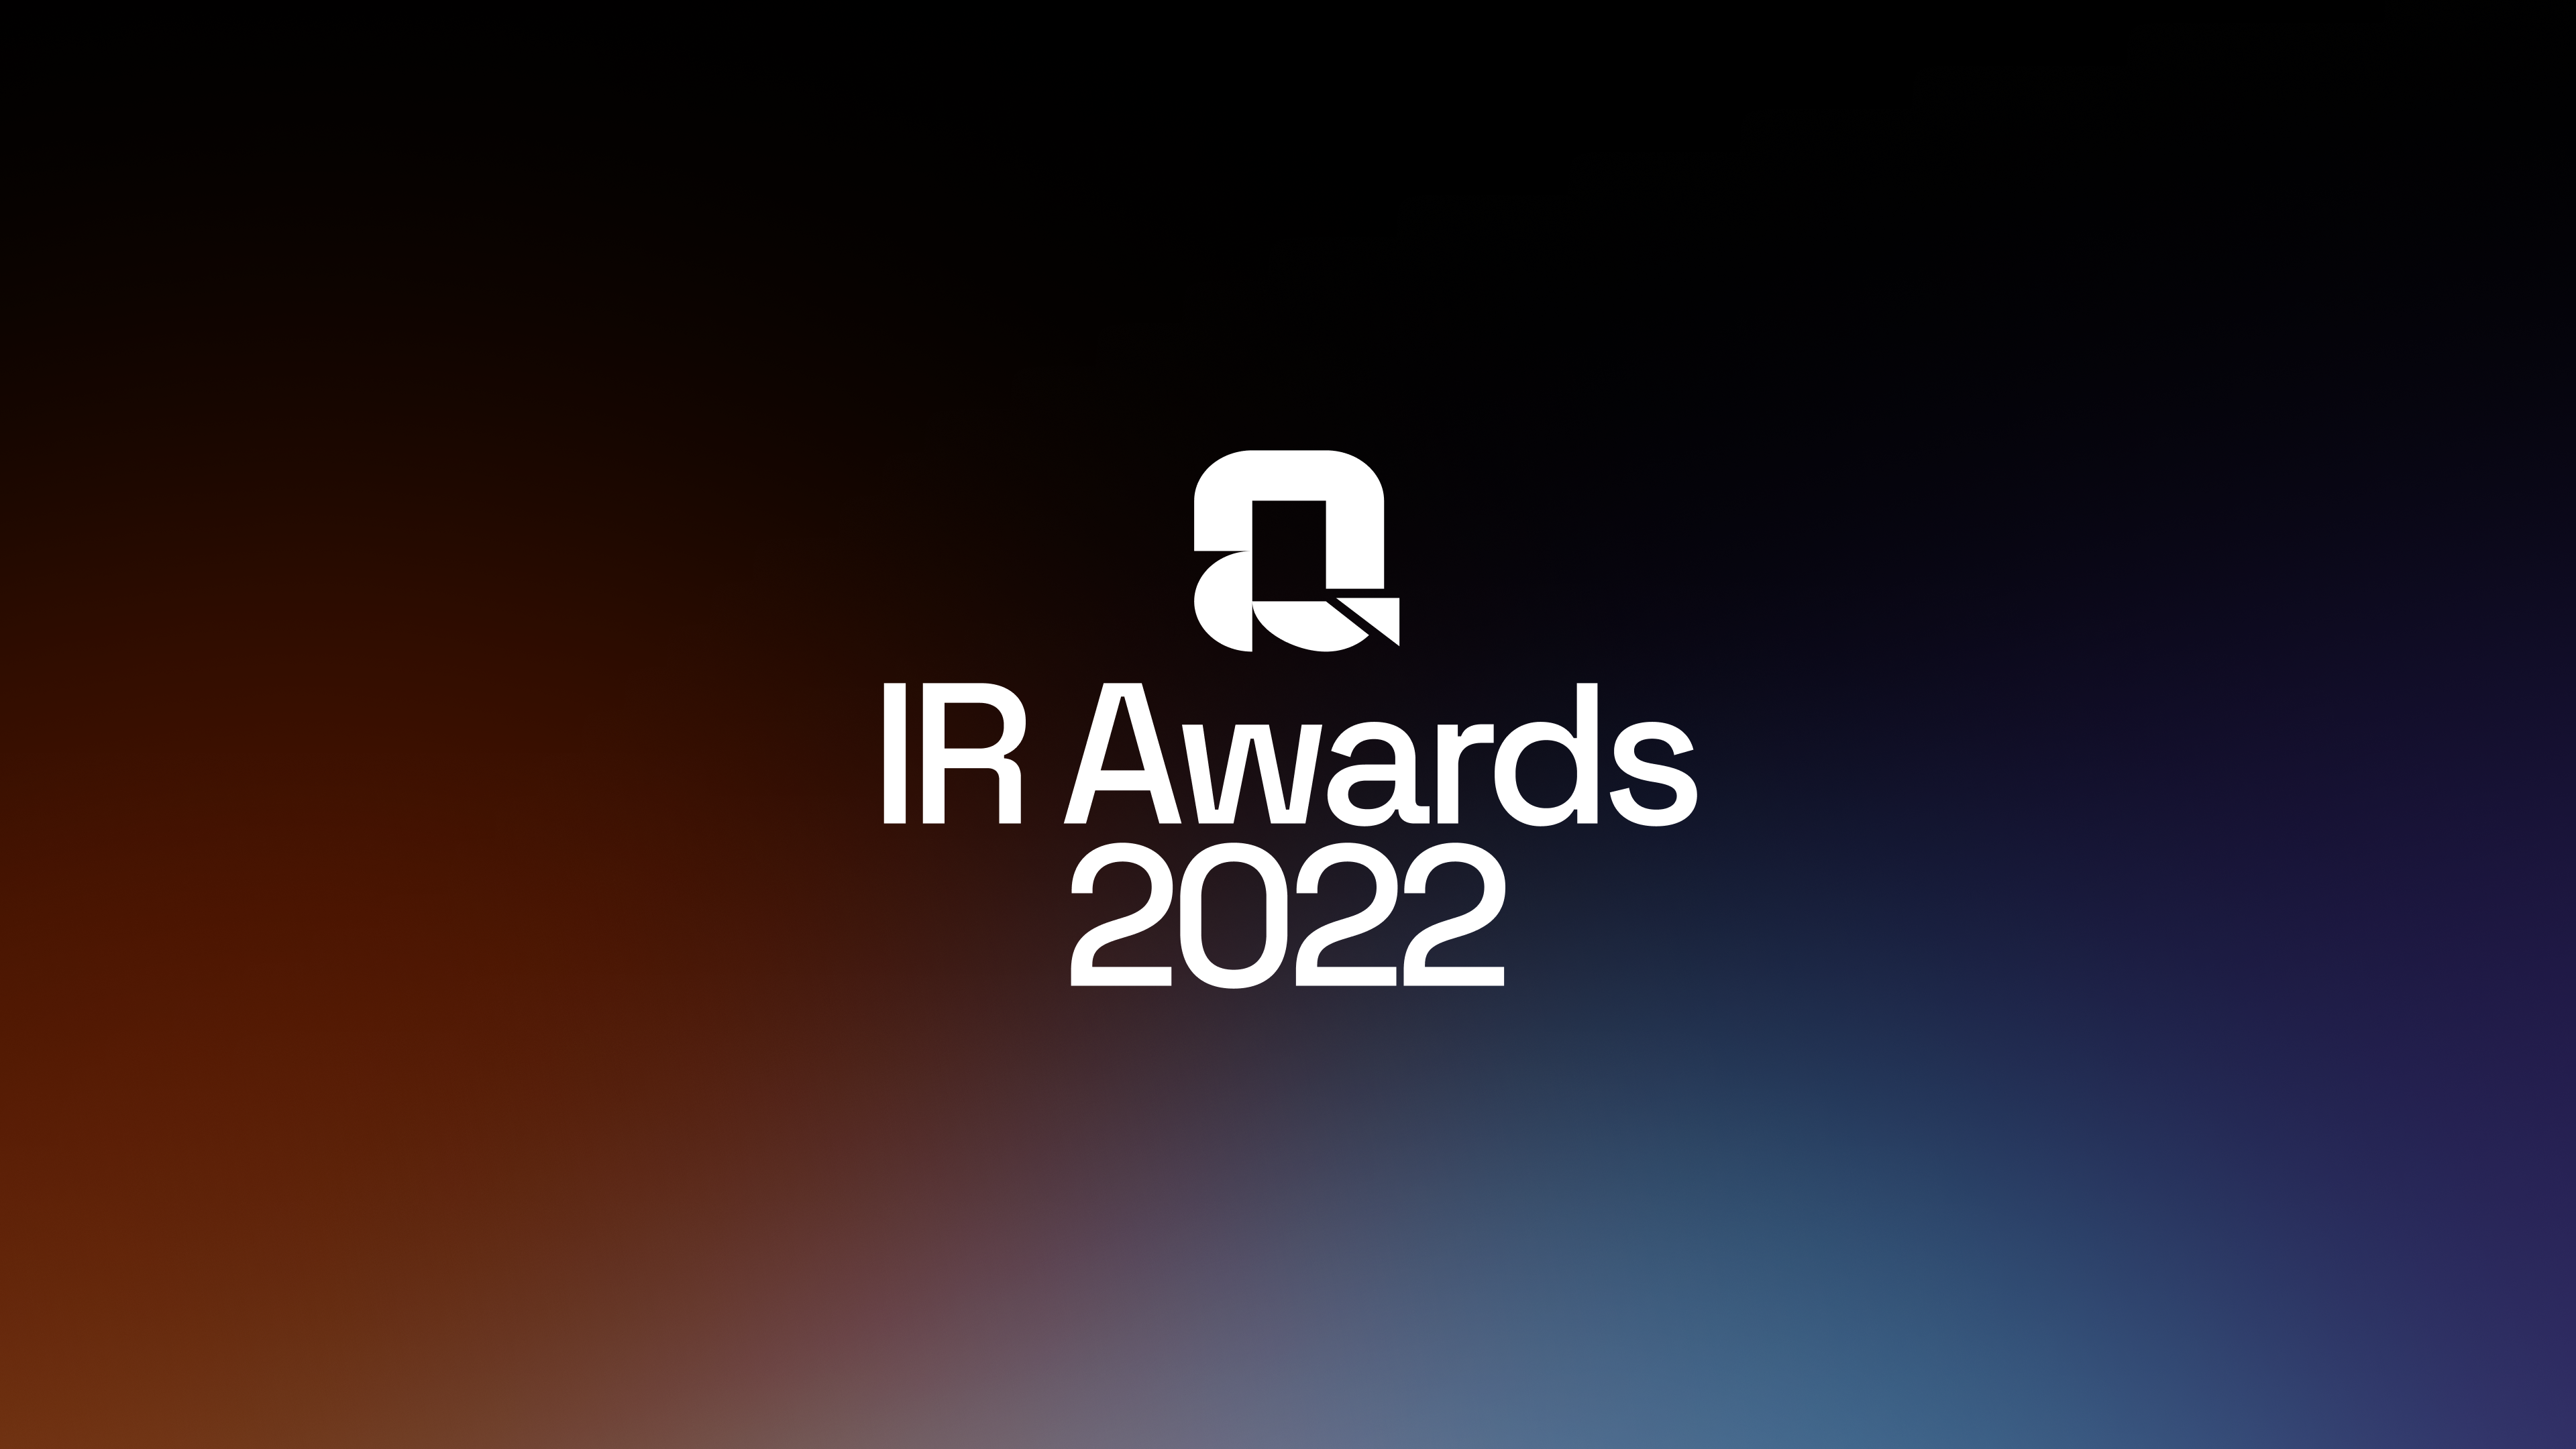 Quartr IR Awards 2022, featuring the best Investor Relations departments of 2022